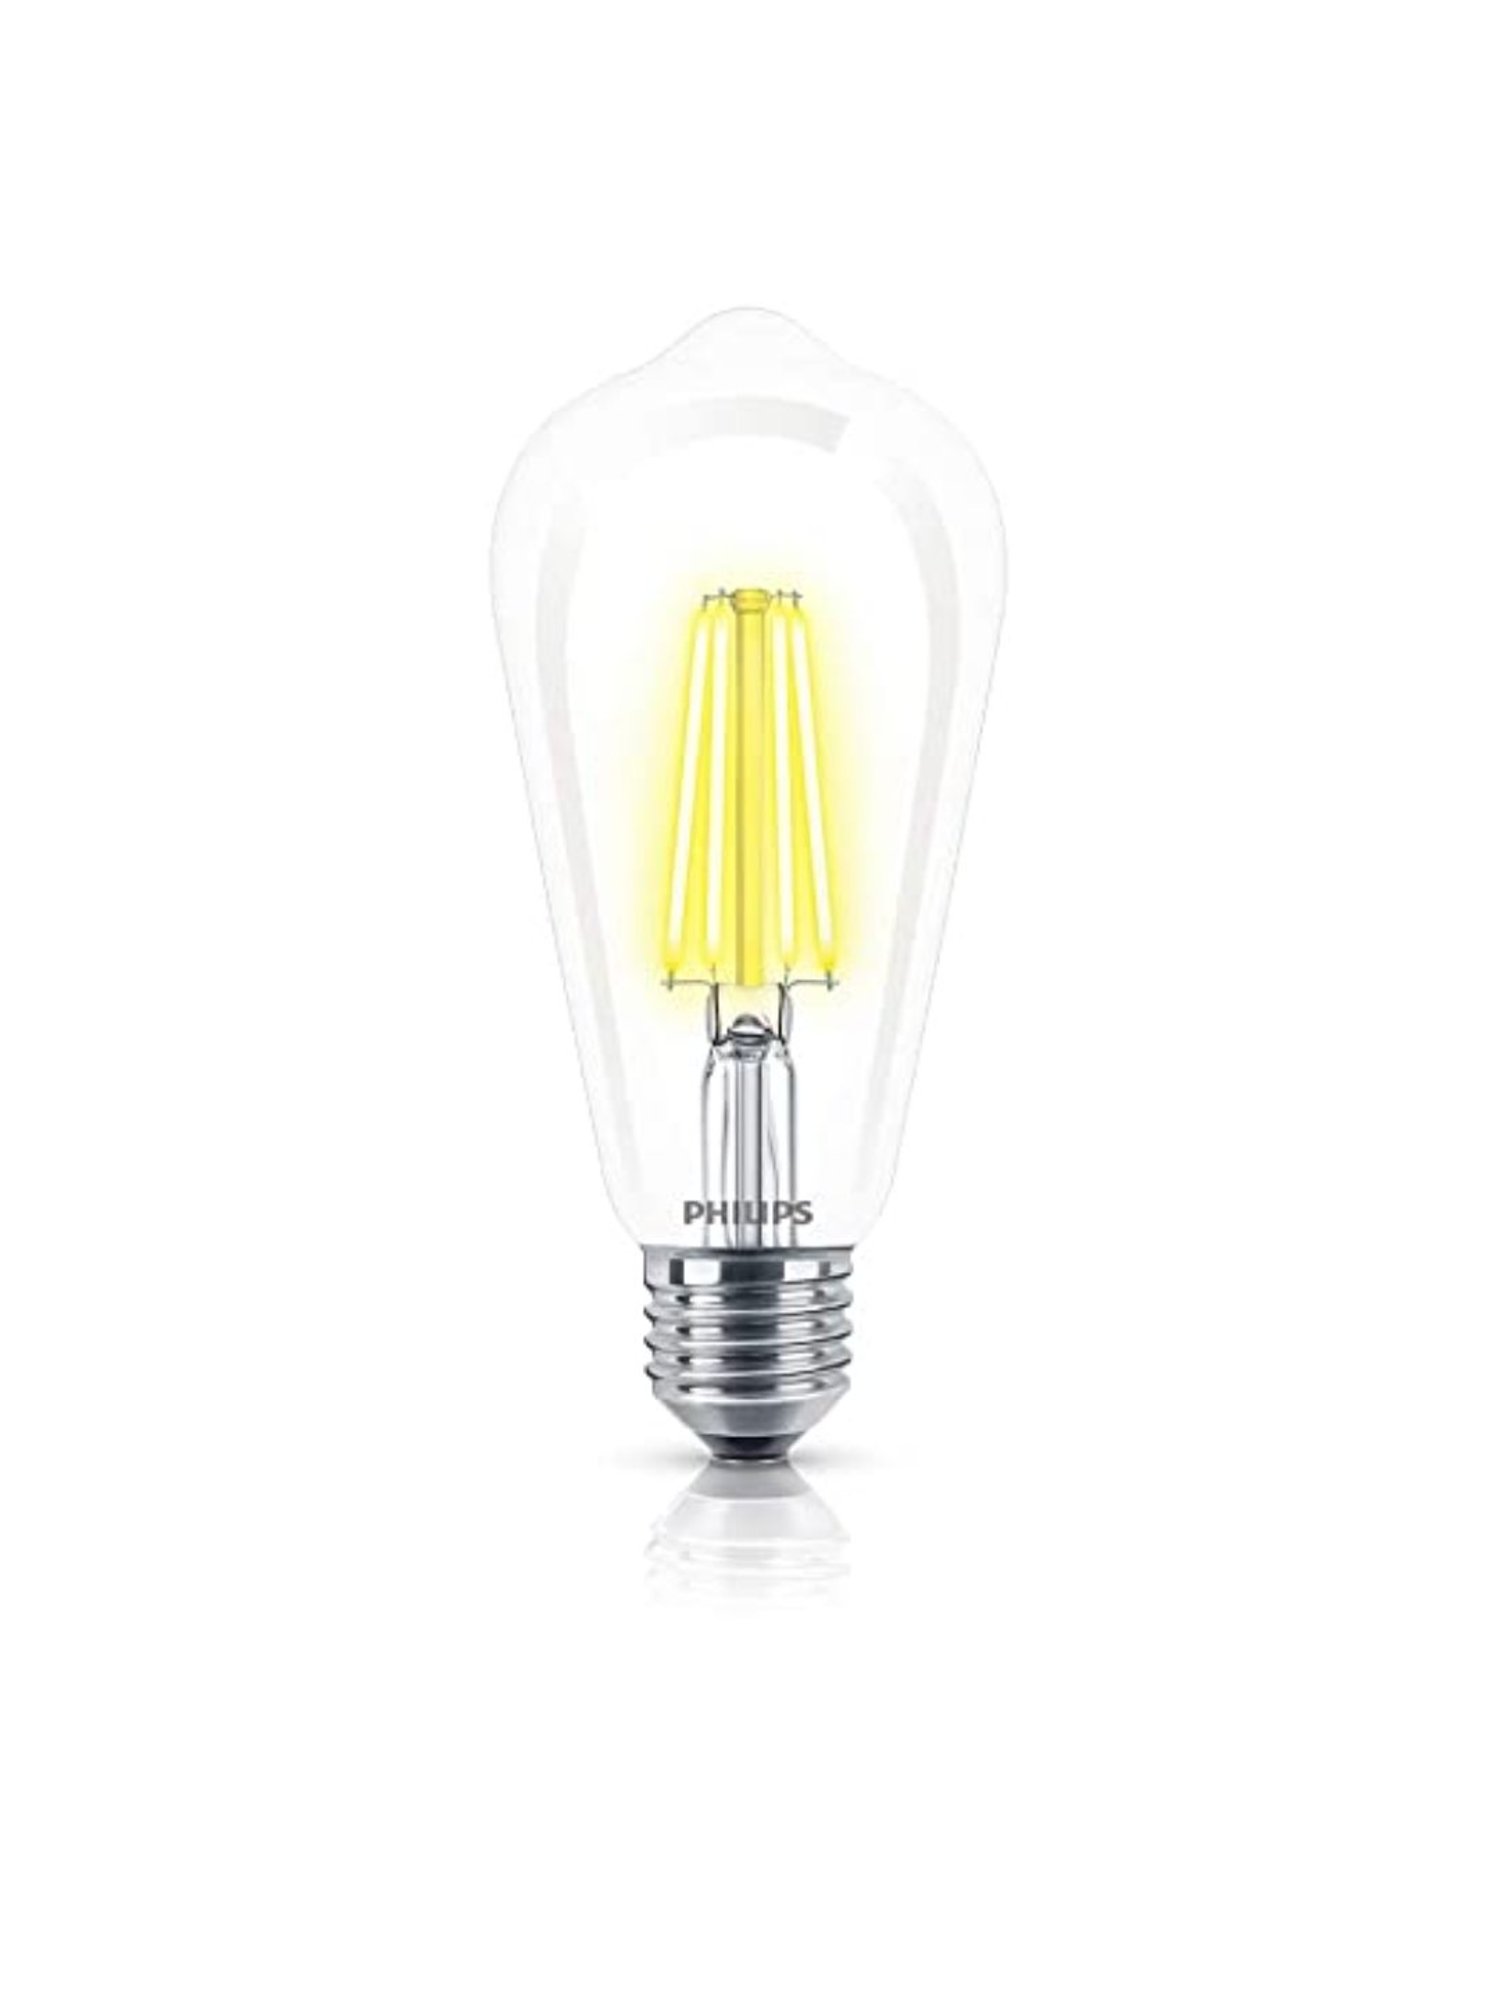 Buy Philips 8W e27 LED Bulb - Golden Yellow and Warm White Online